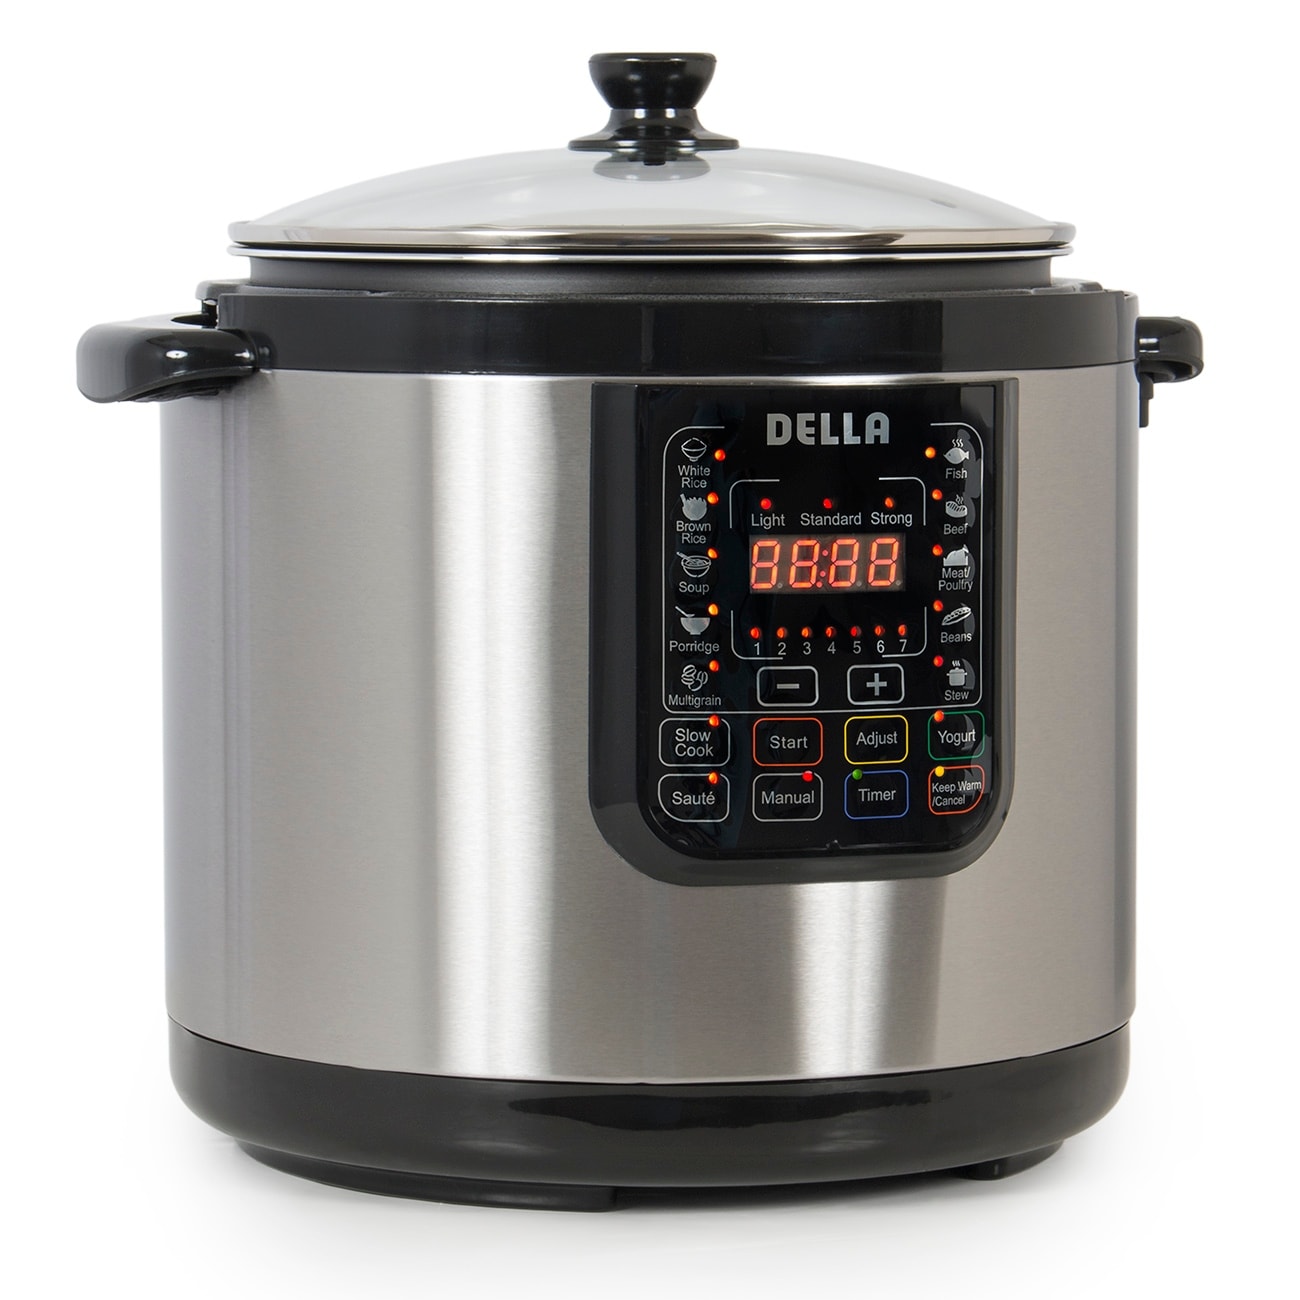 https://ak1.ostkcdn.com/images/products/is/images/direct/22db4a0549bb414a601fe3e680cc937b0539cb49/Della-10-in-1-Multi-Function-Electric-Pressure-Cooker-Stainless-Steel%2C-Programmable-10-QT.jpg